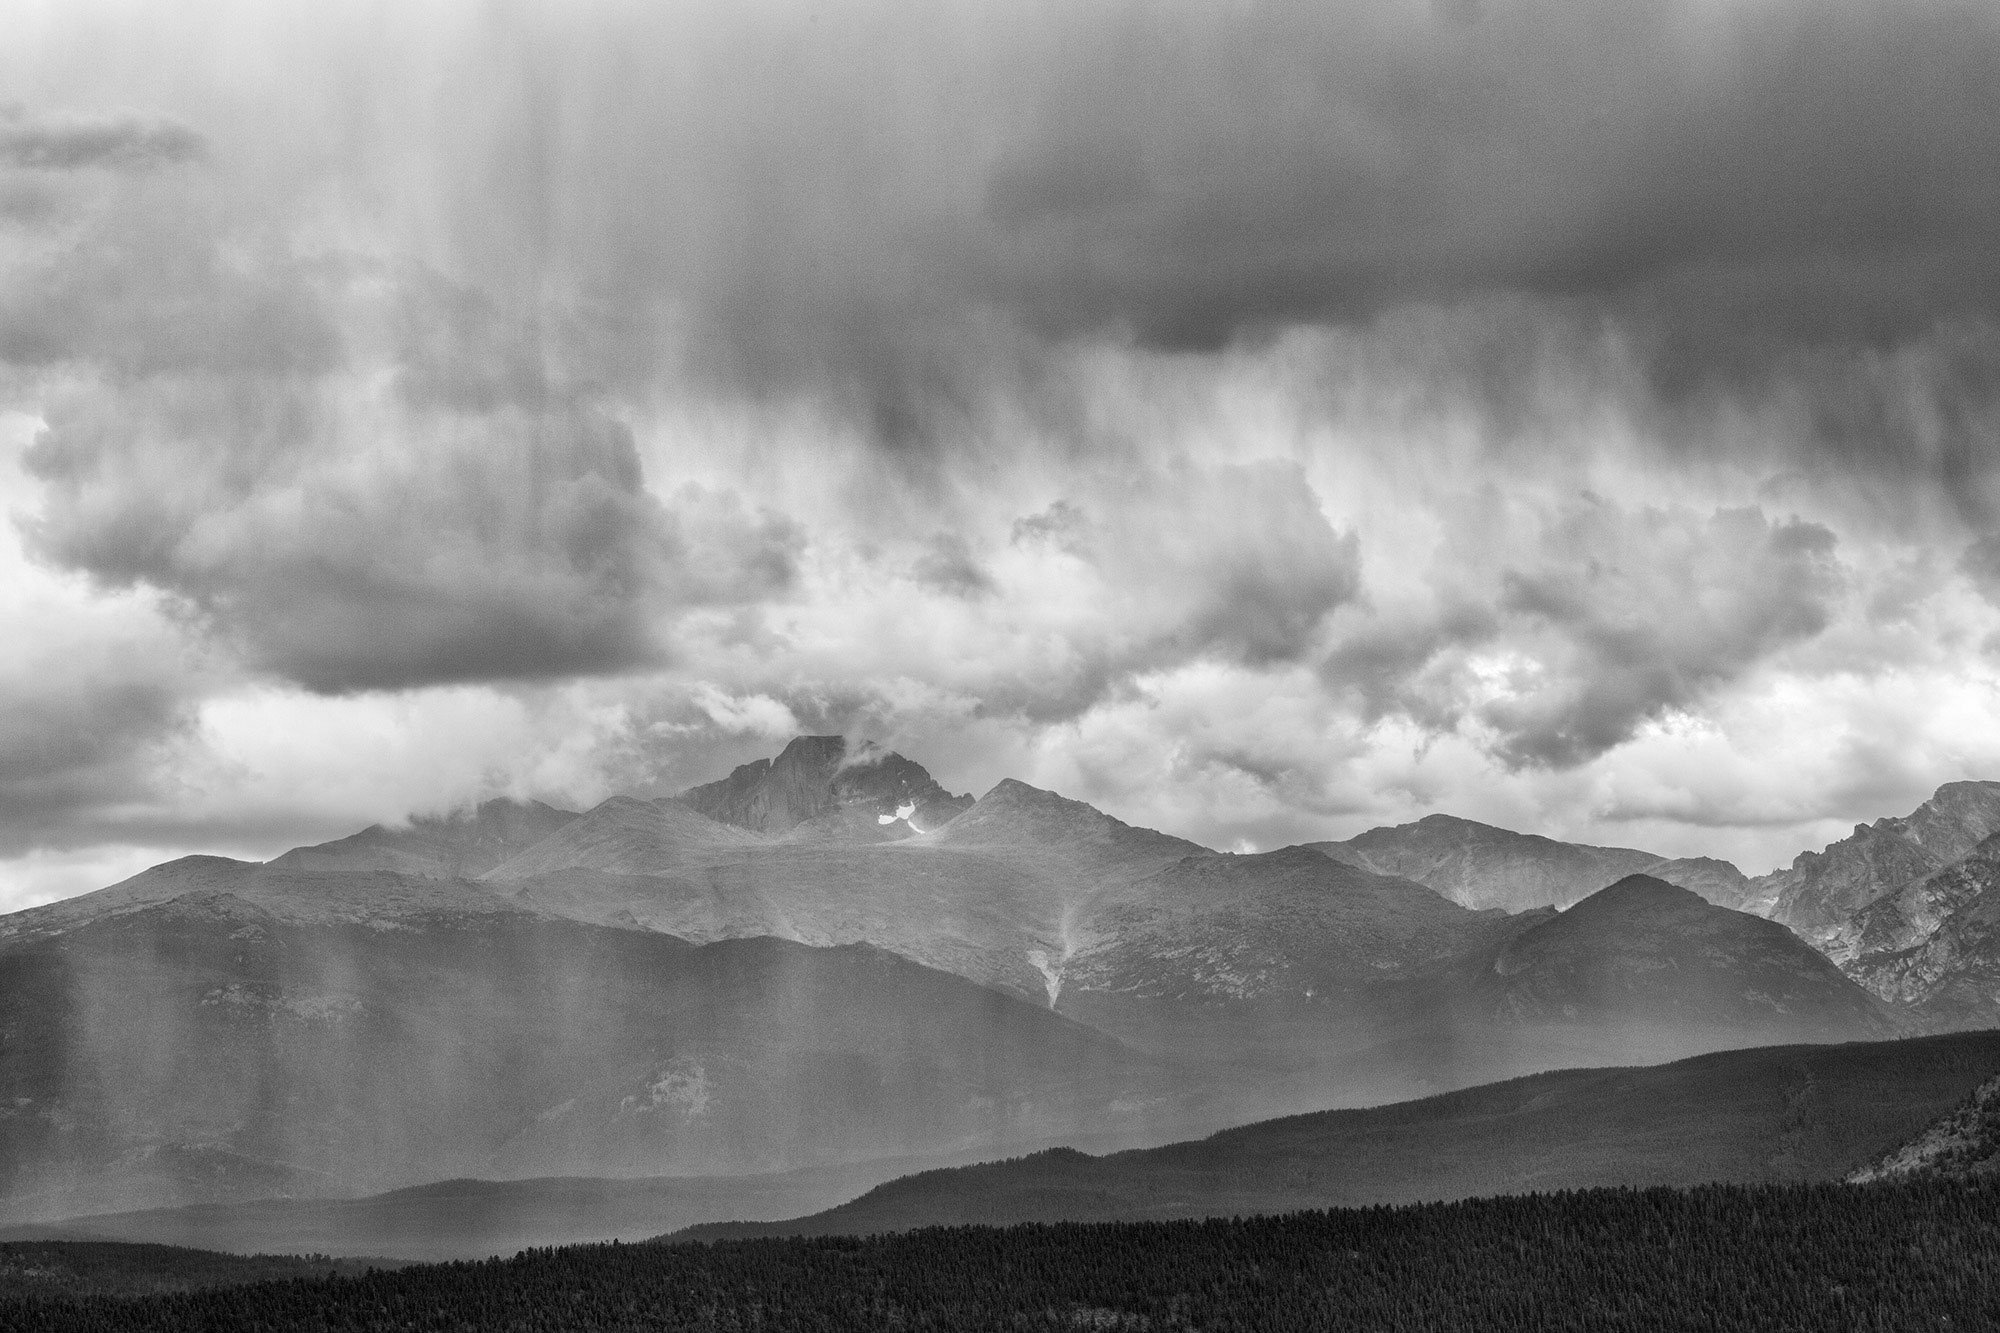 Passing thunderstorm over mountains in Rocky Mountains-Cloudburst